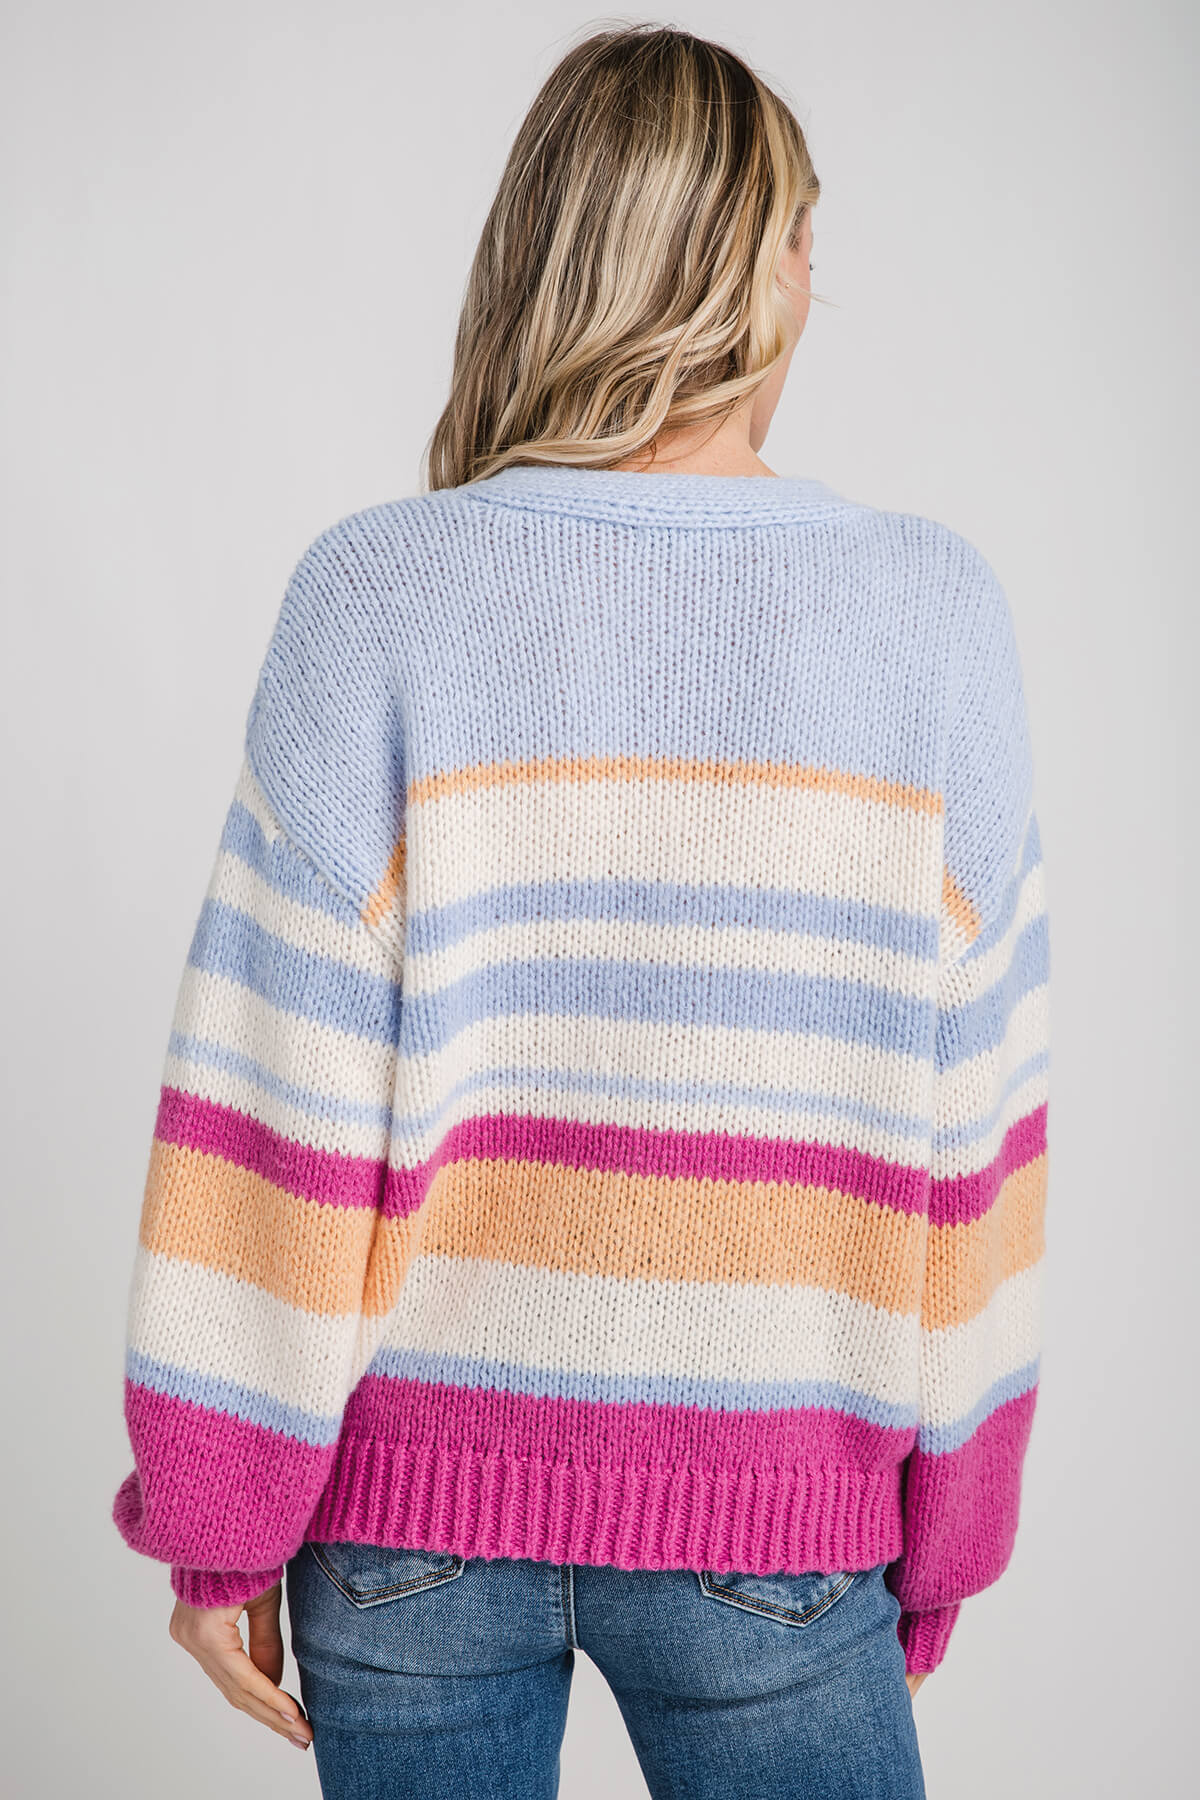 Z Supply Chasing Sunsets Cardigan